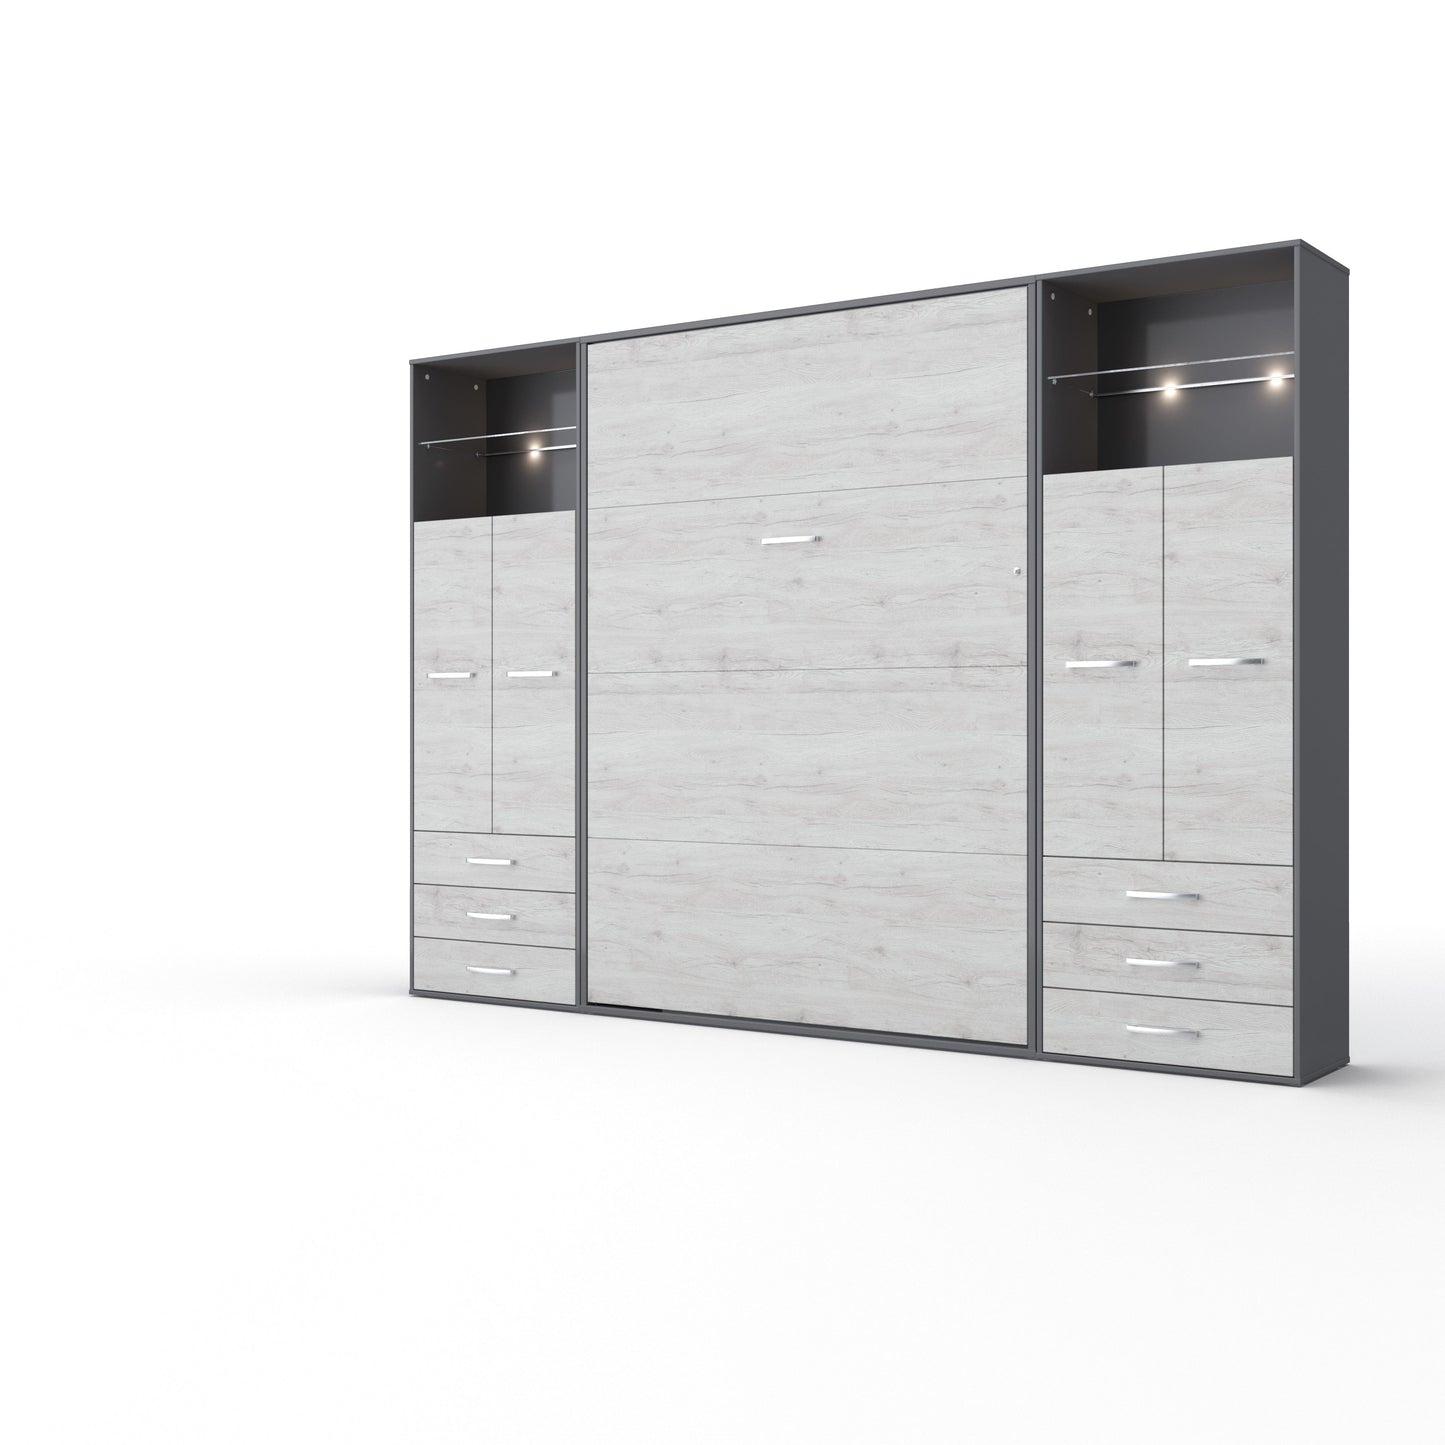 Maxima House Maxima House Vertical Wall Bed Invento, European Full Size with 2 cabinets Grey/White Monaco IN120V-10GW